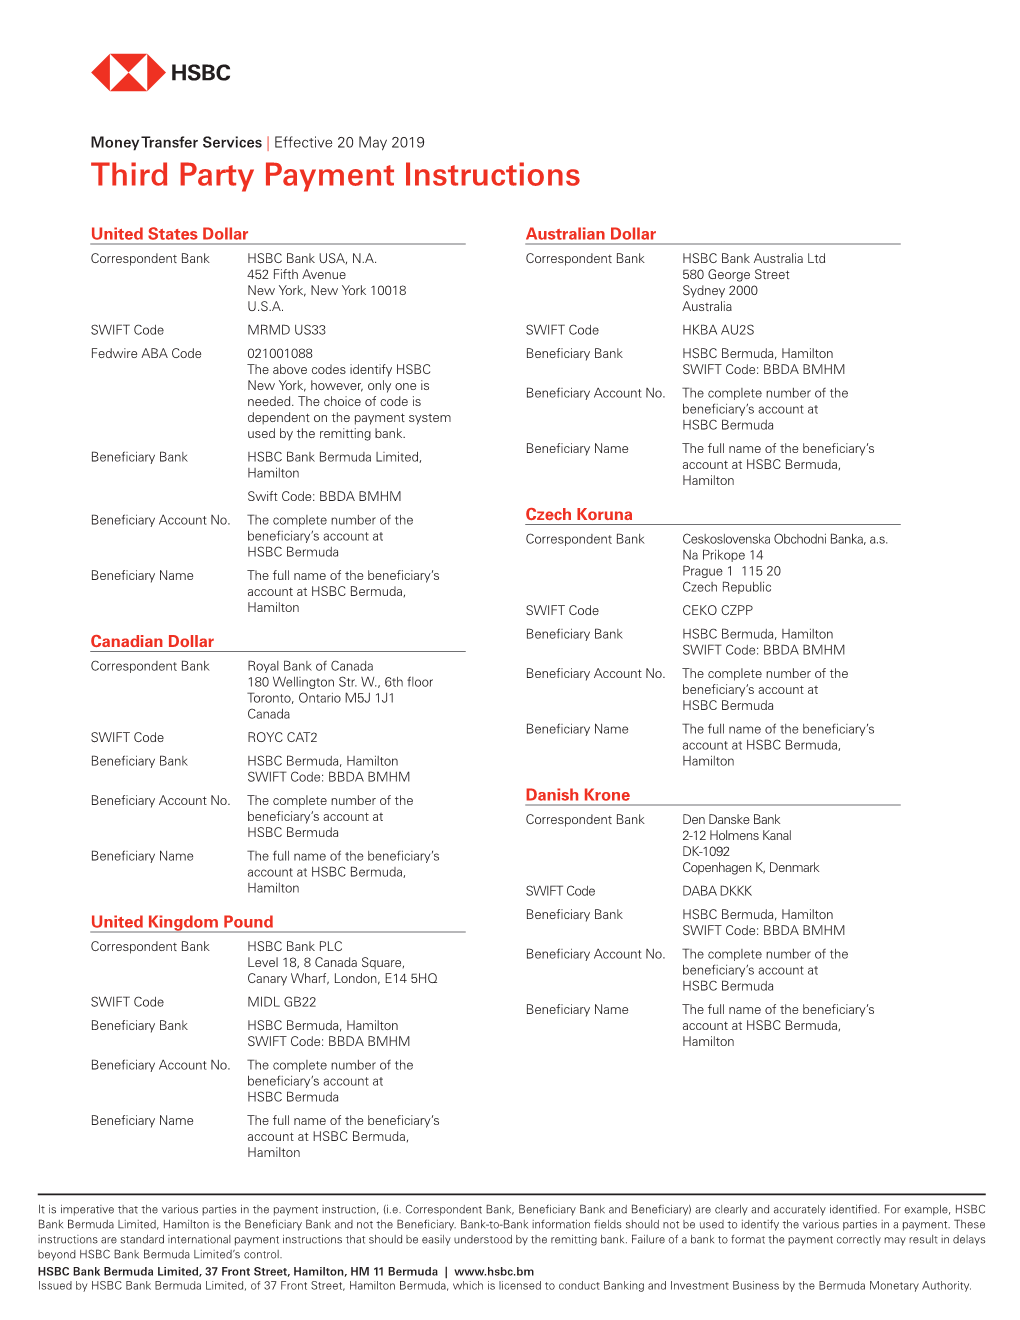 Third Party Payment Instructions